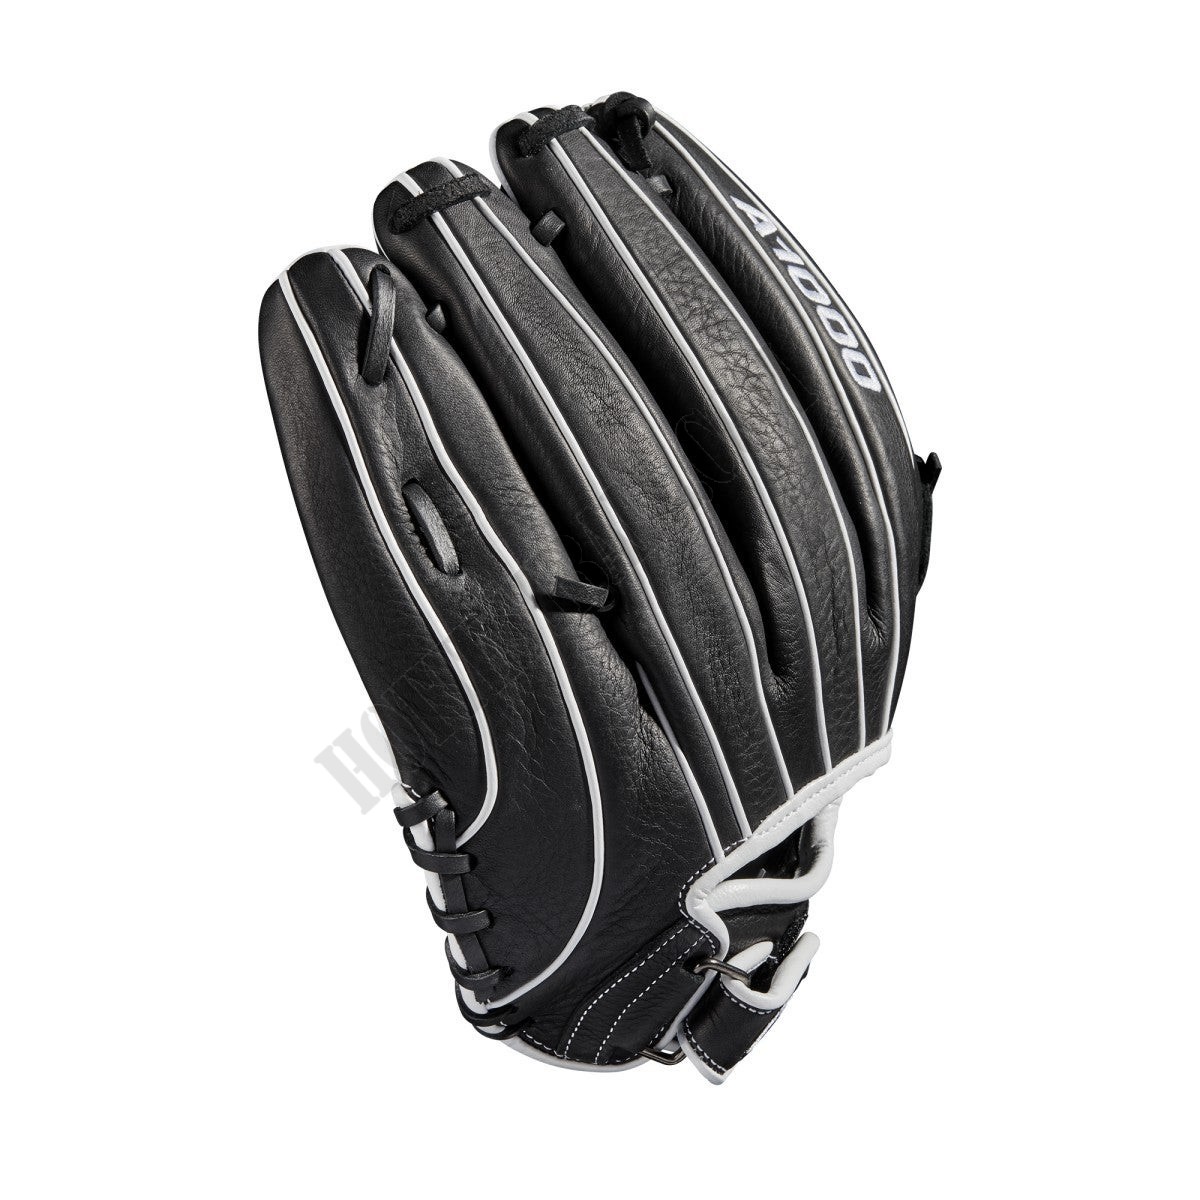 2019 A1000 12" Pitcher's Fastpitch Glove ● Wilson Promotions - -4